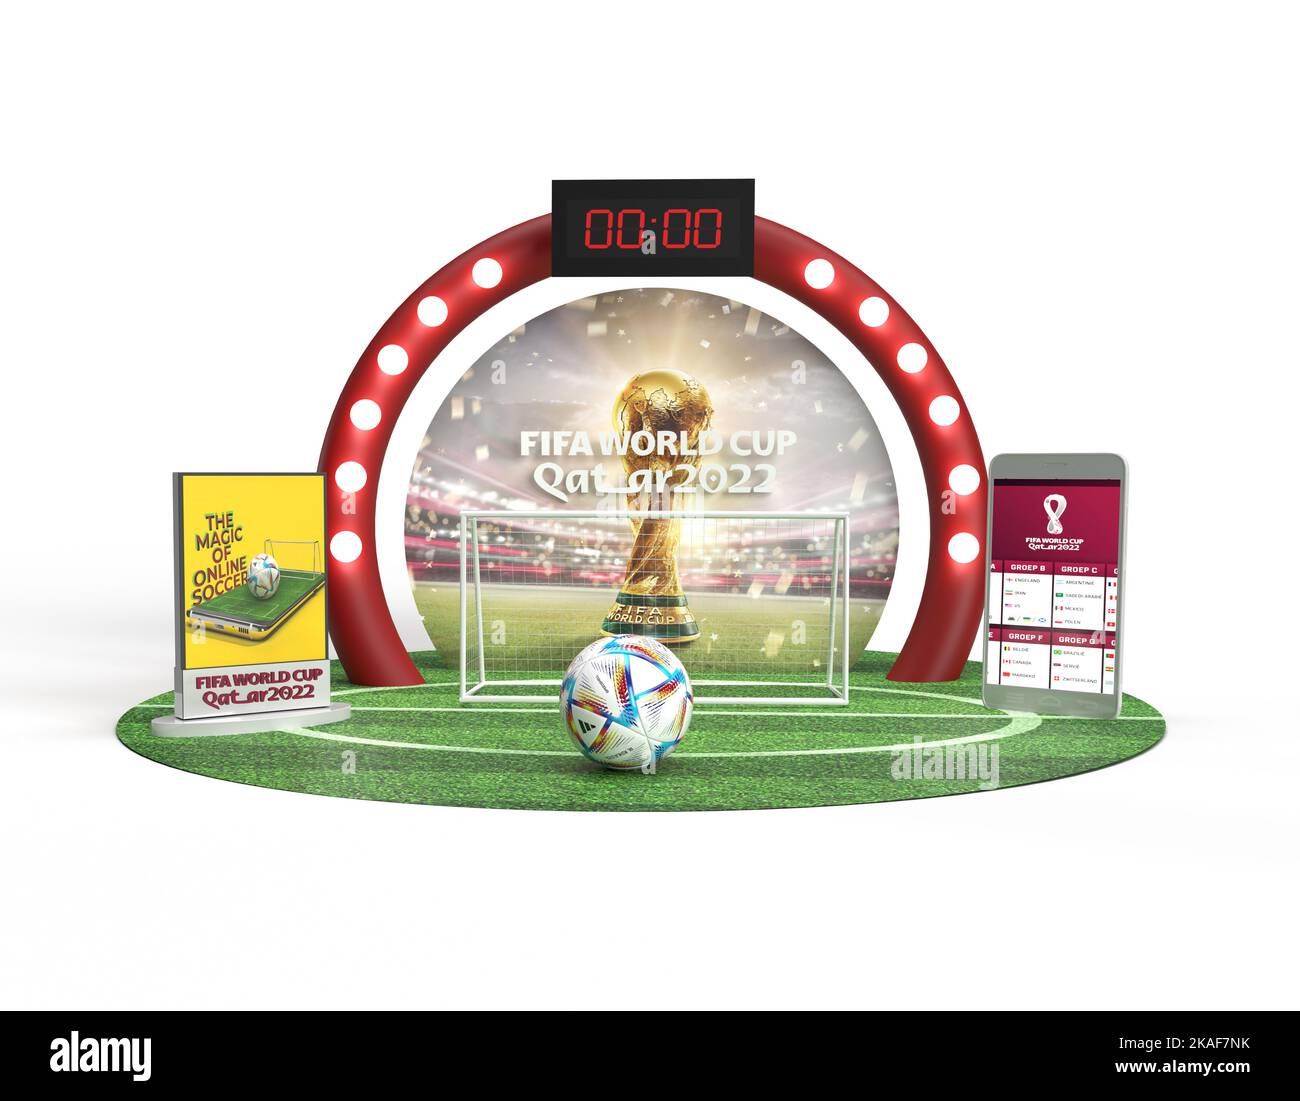 Qatar World Cup Images – Browse 23,393 Stock Photos, Vectors, and